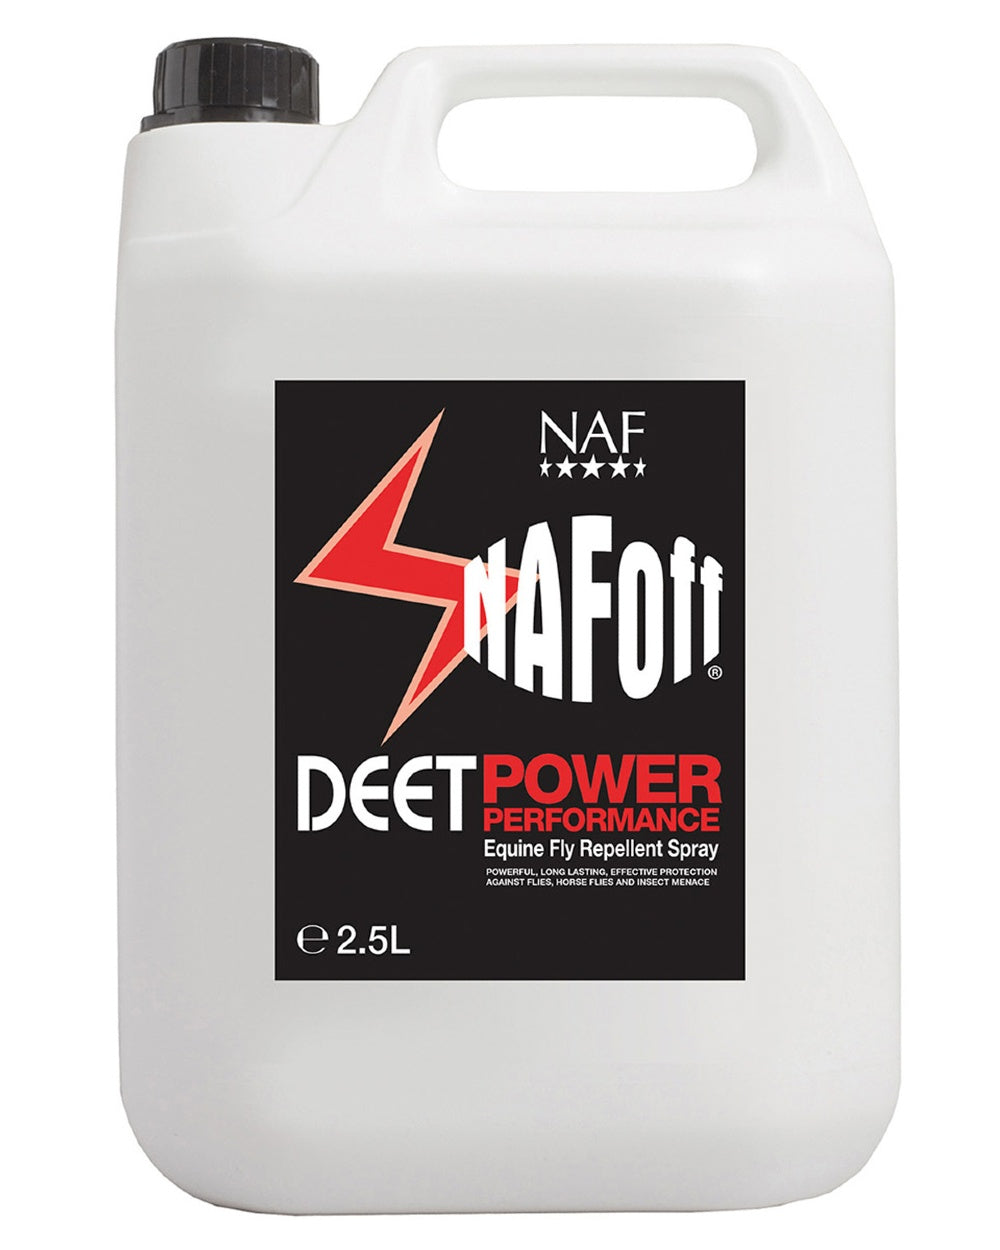 NAF Off Deet Power Performance 2.5l on white background